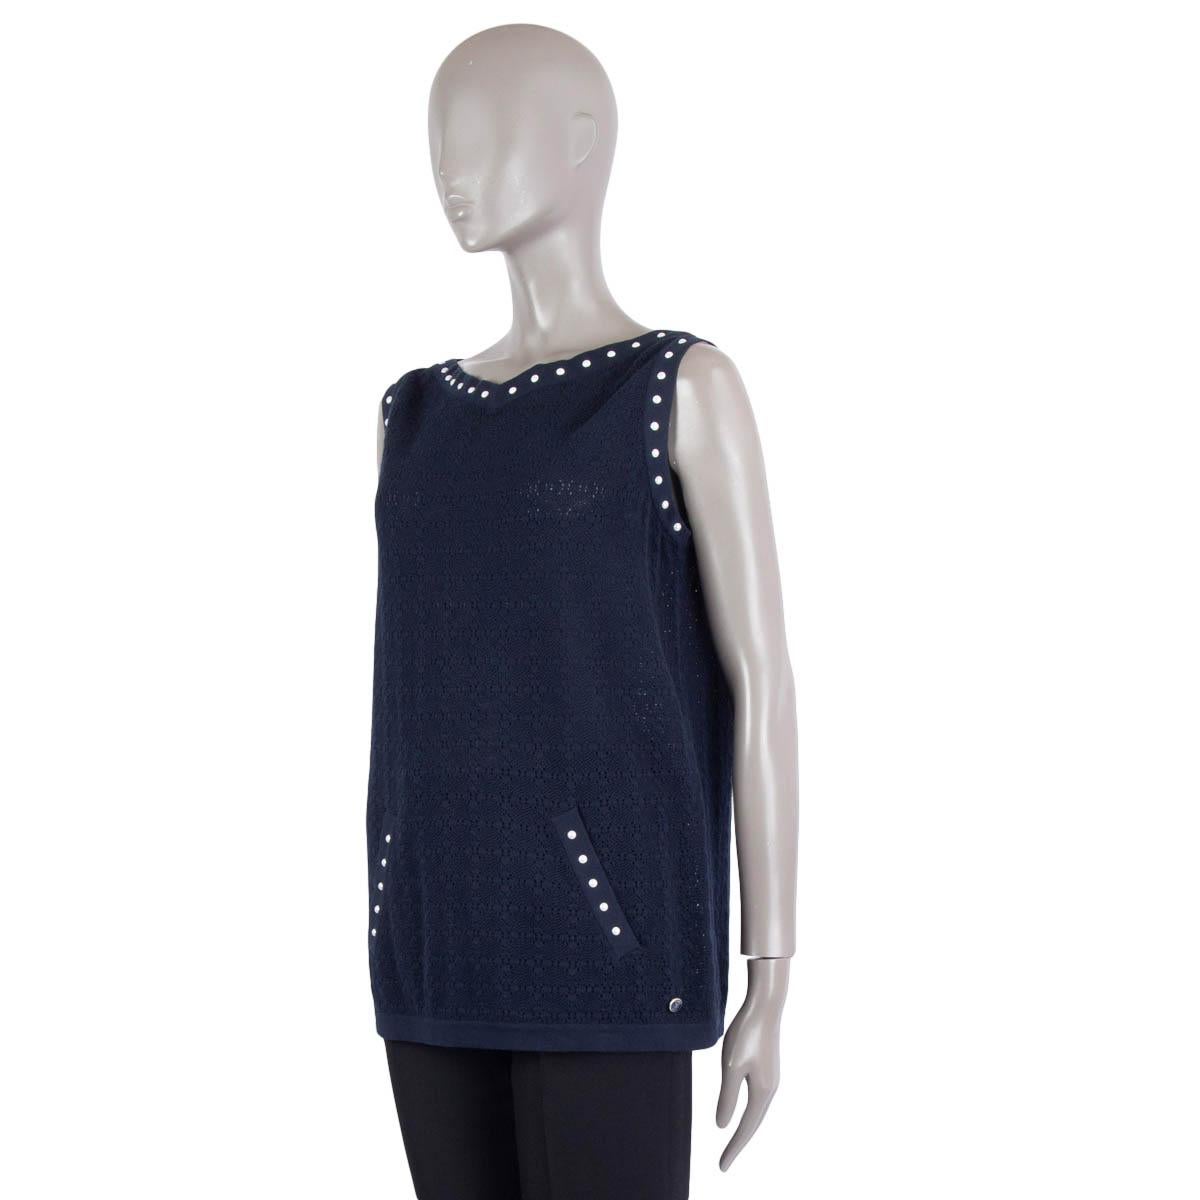 Women's CHANEL navy blue cotton 2016 PEARL STUDDED KNIT Shirt 40 M For Sale